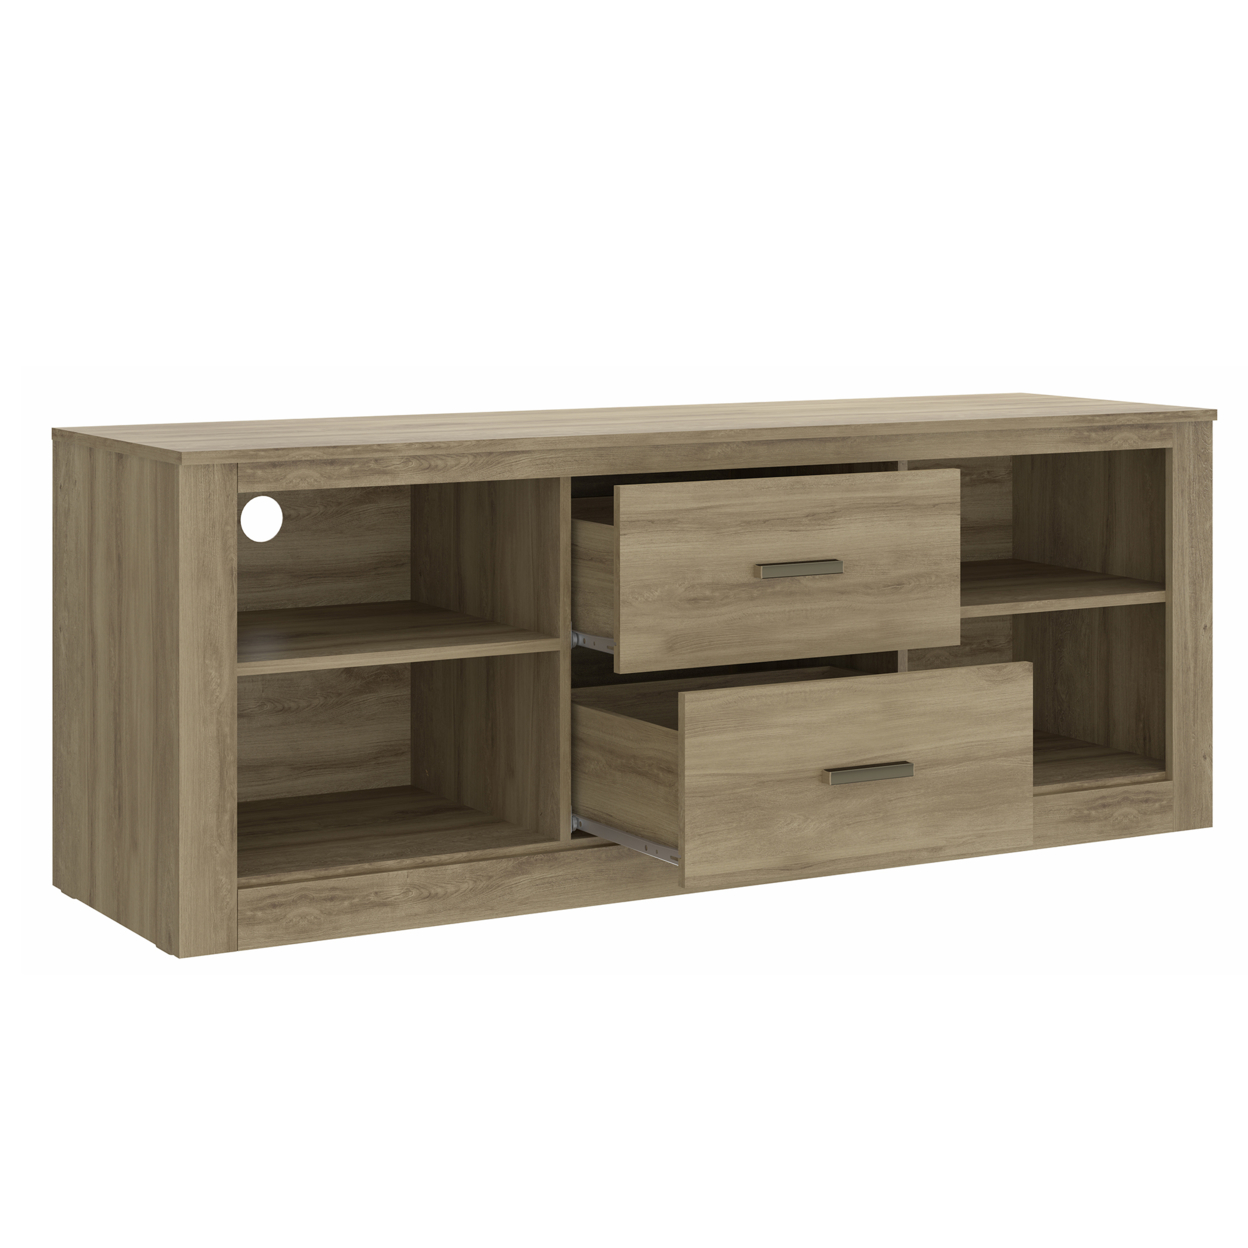 59 Inch Wooden TV Stand With 2 Drawers And 4 Open Compartments, Oak Brown- Saltoro Sherpi